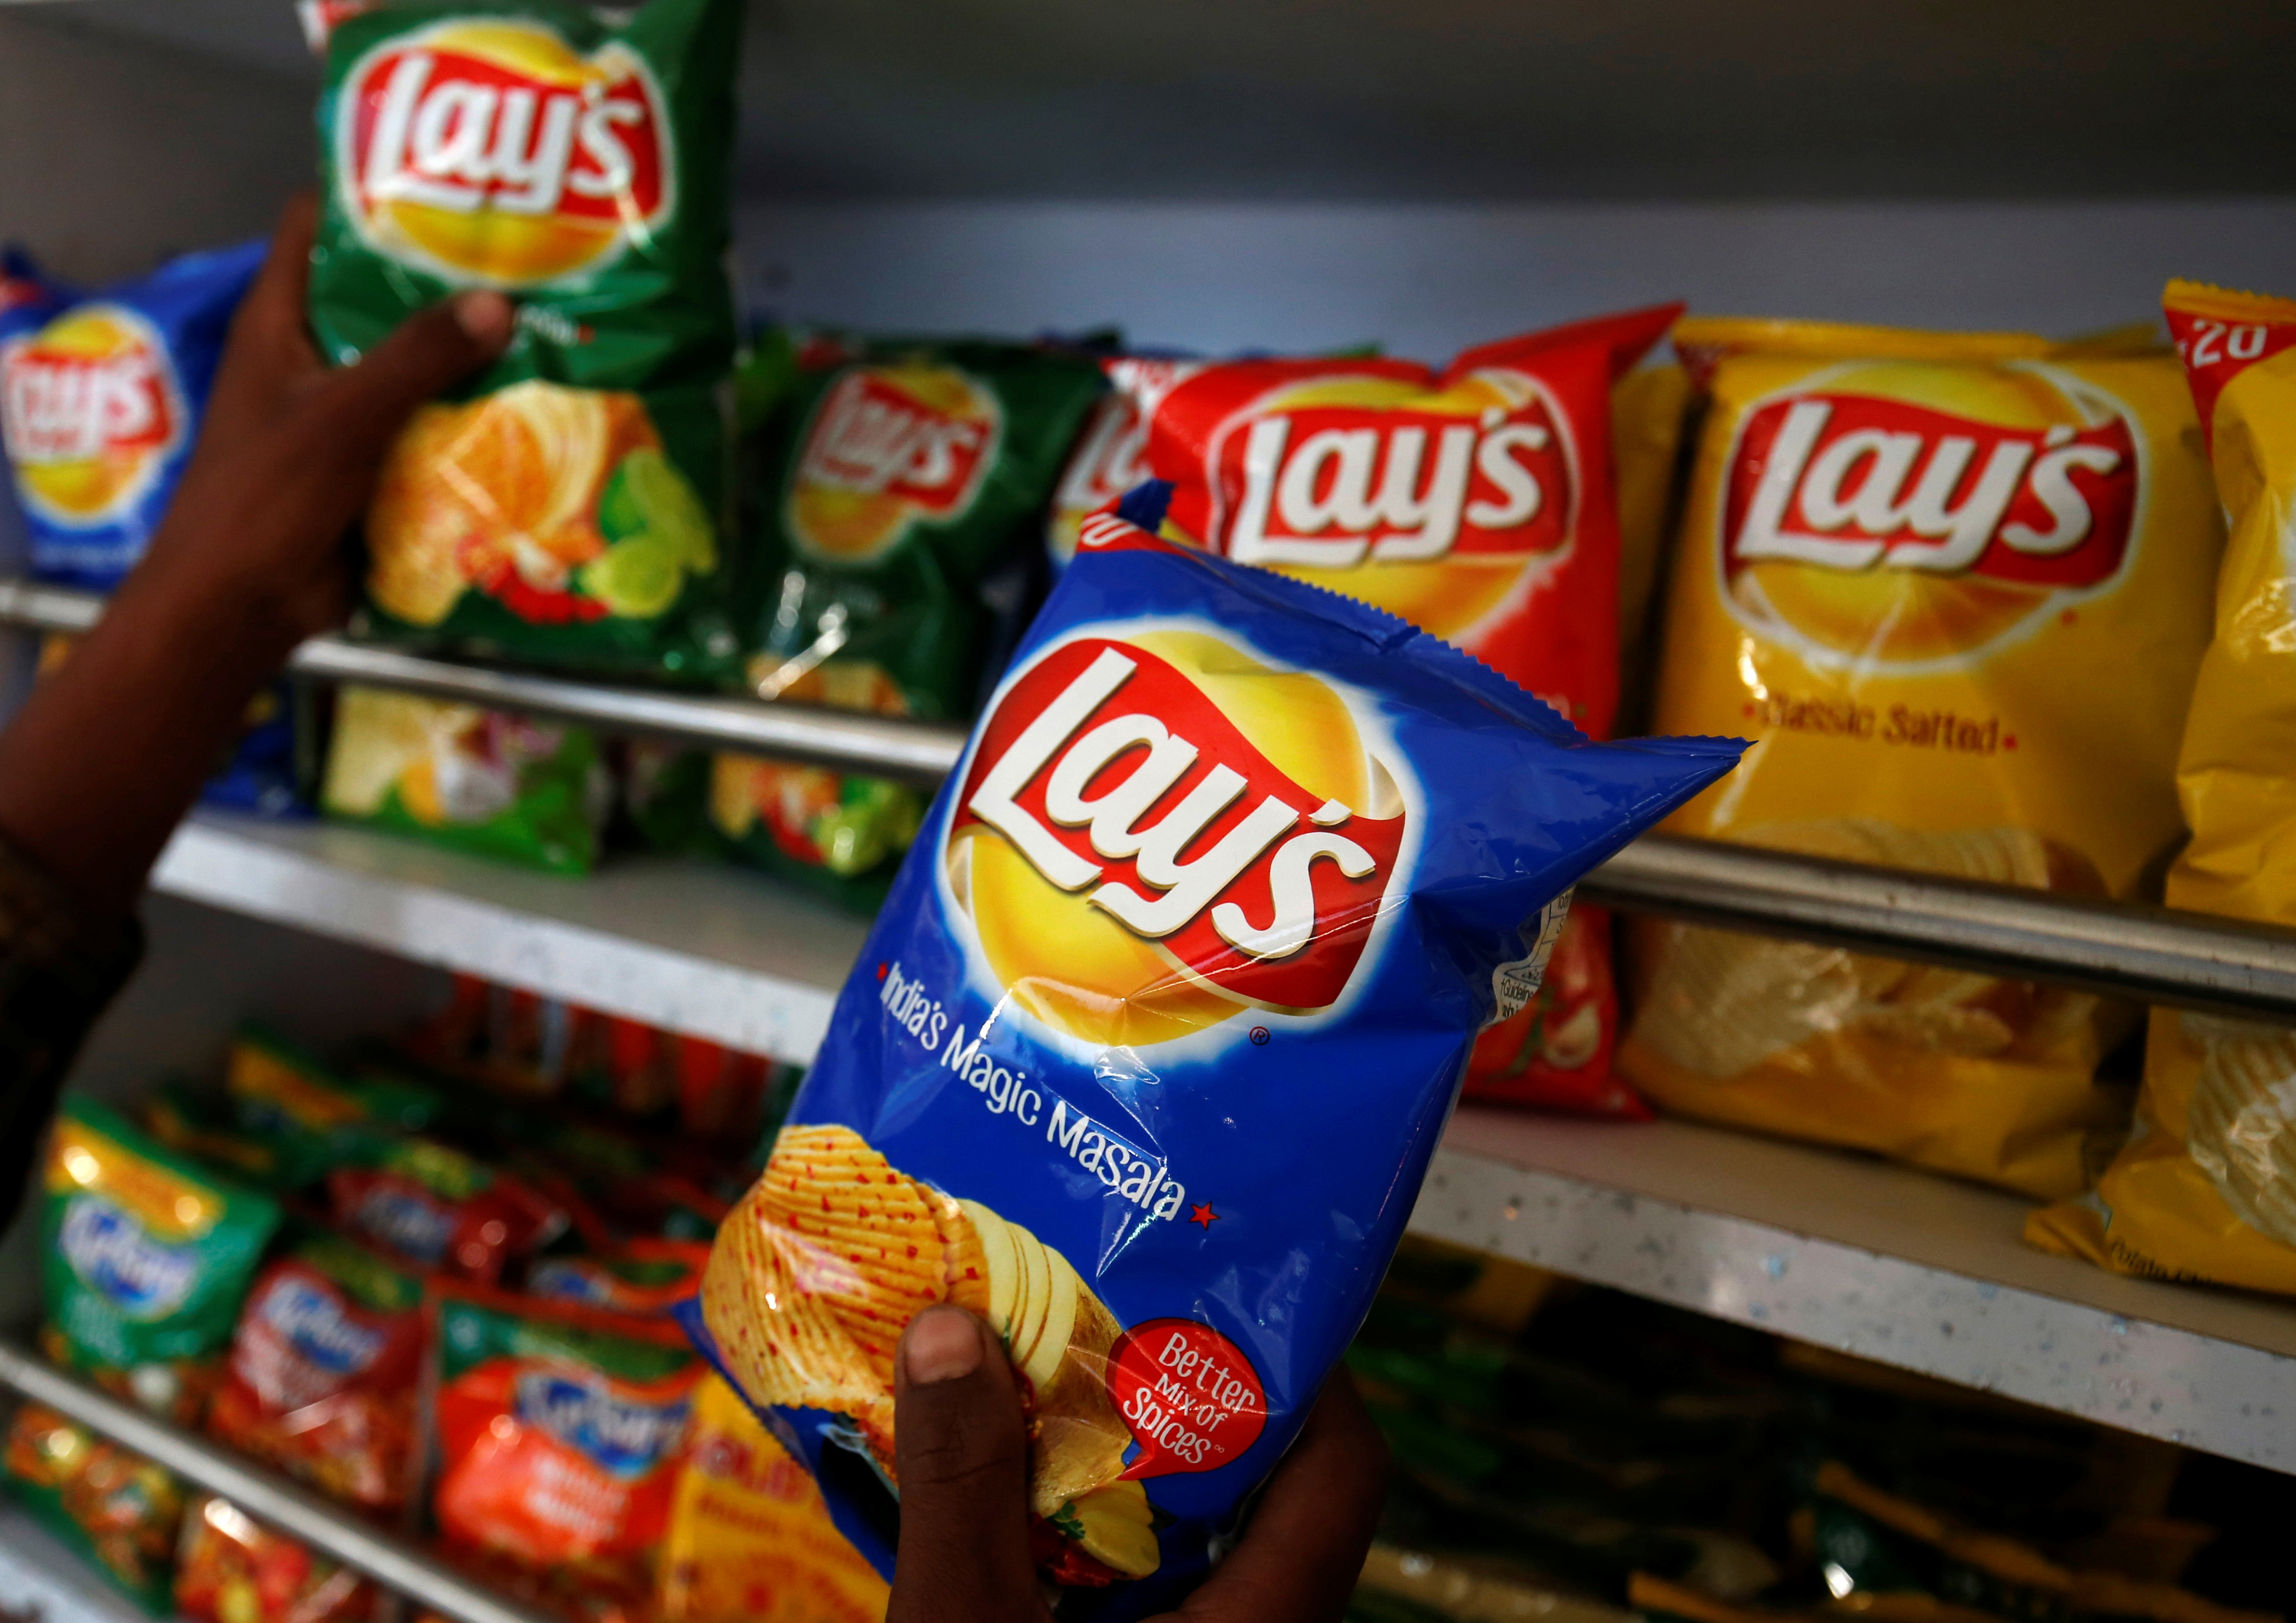 A customer picks packets of Lay's potato chips at a shop in Ahmedabad, India, April 26, 2019. REUTERS/Amit Dave